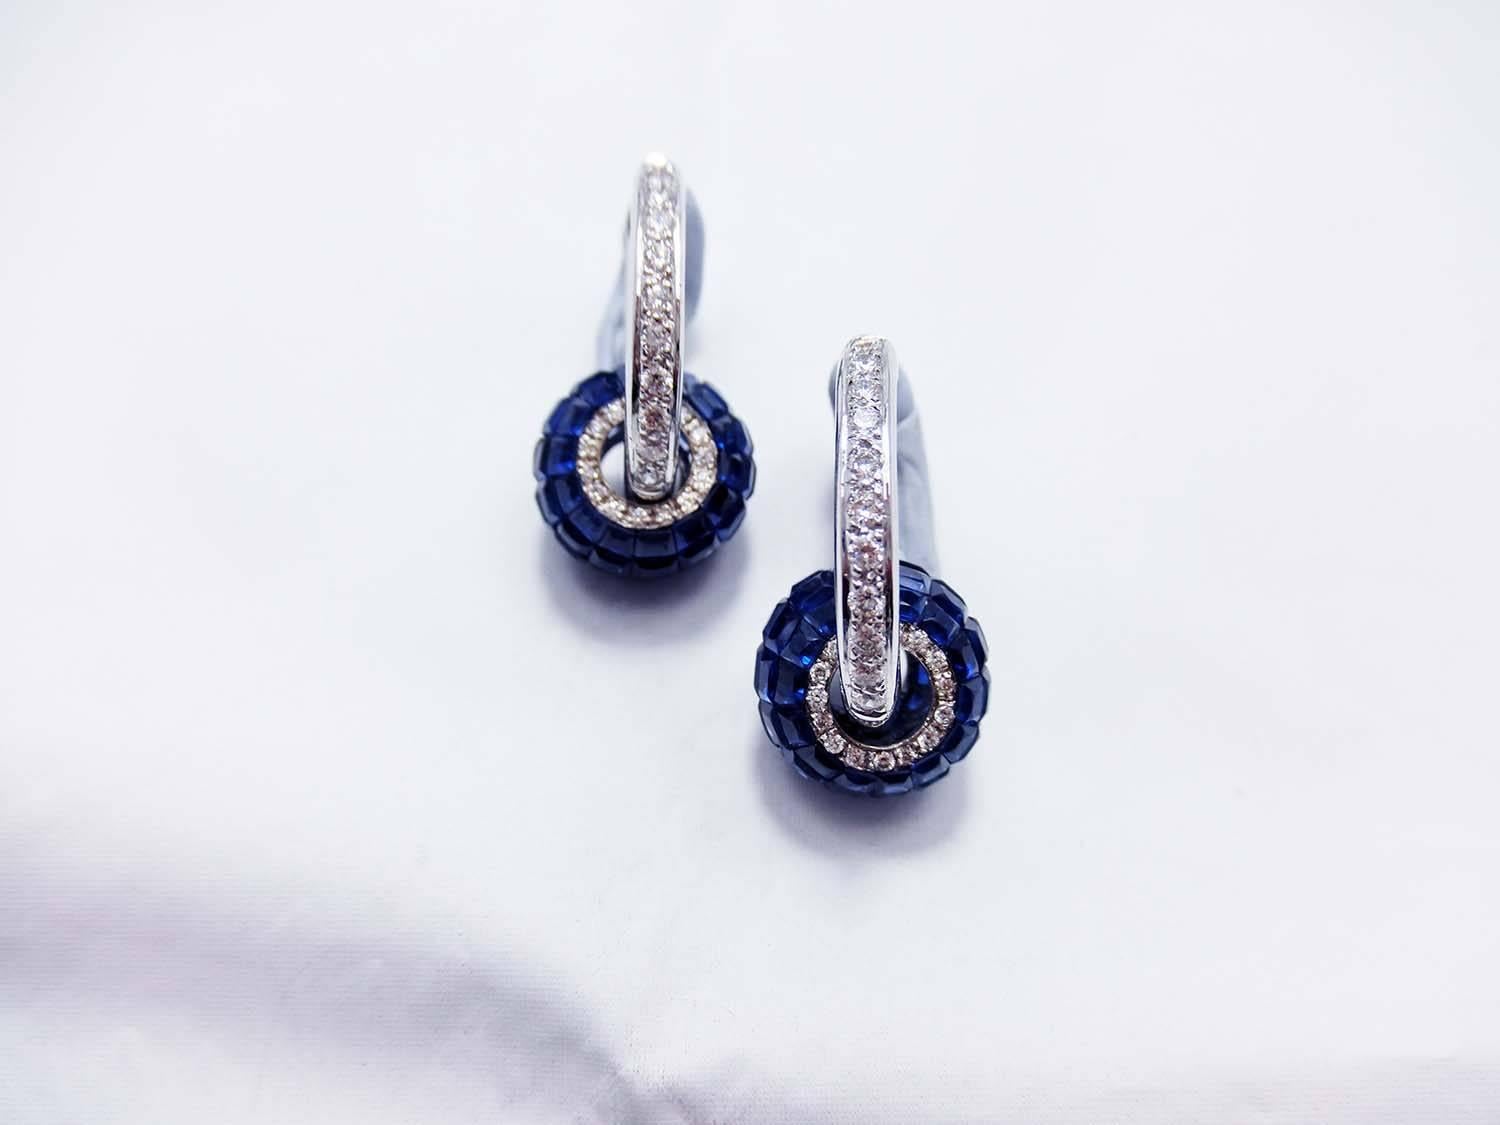 The top quality Sapphire which make in invisible setting.We set the stone in perfection as we are professional in this kind of setting more than 40 years.The invisible is a highly technique .We cut and groove every stone .Therefore; we can guarantee